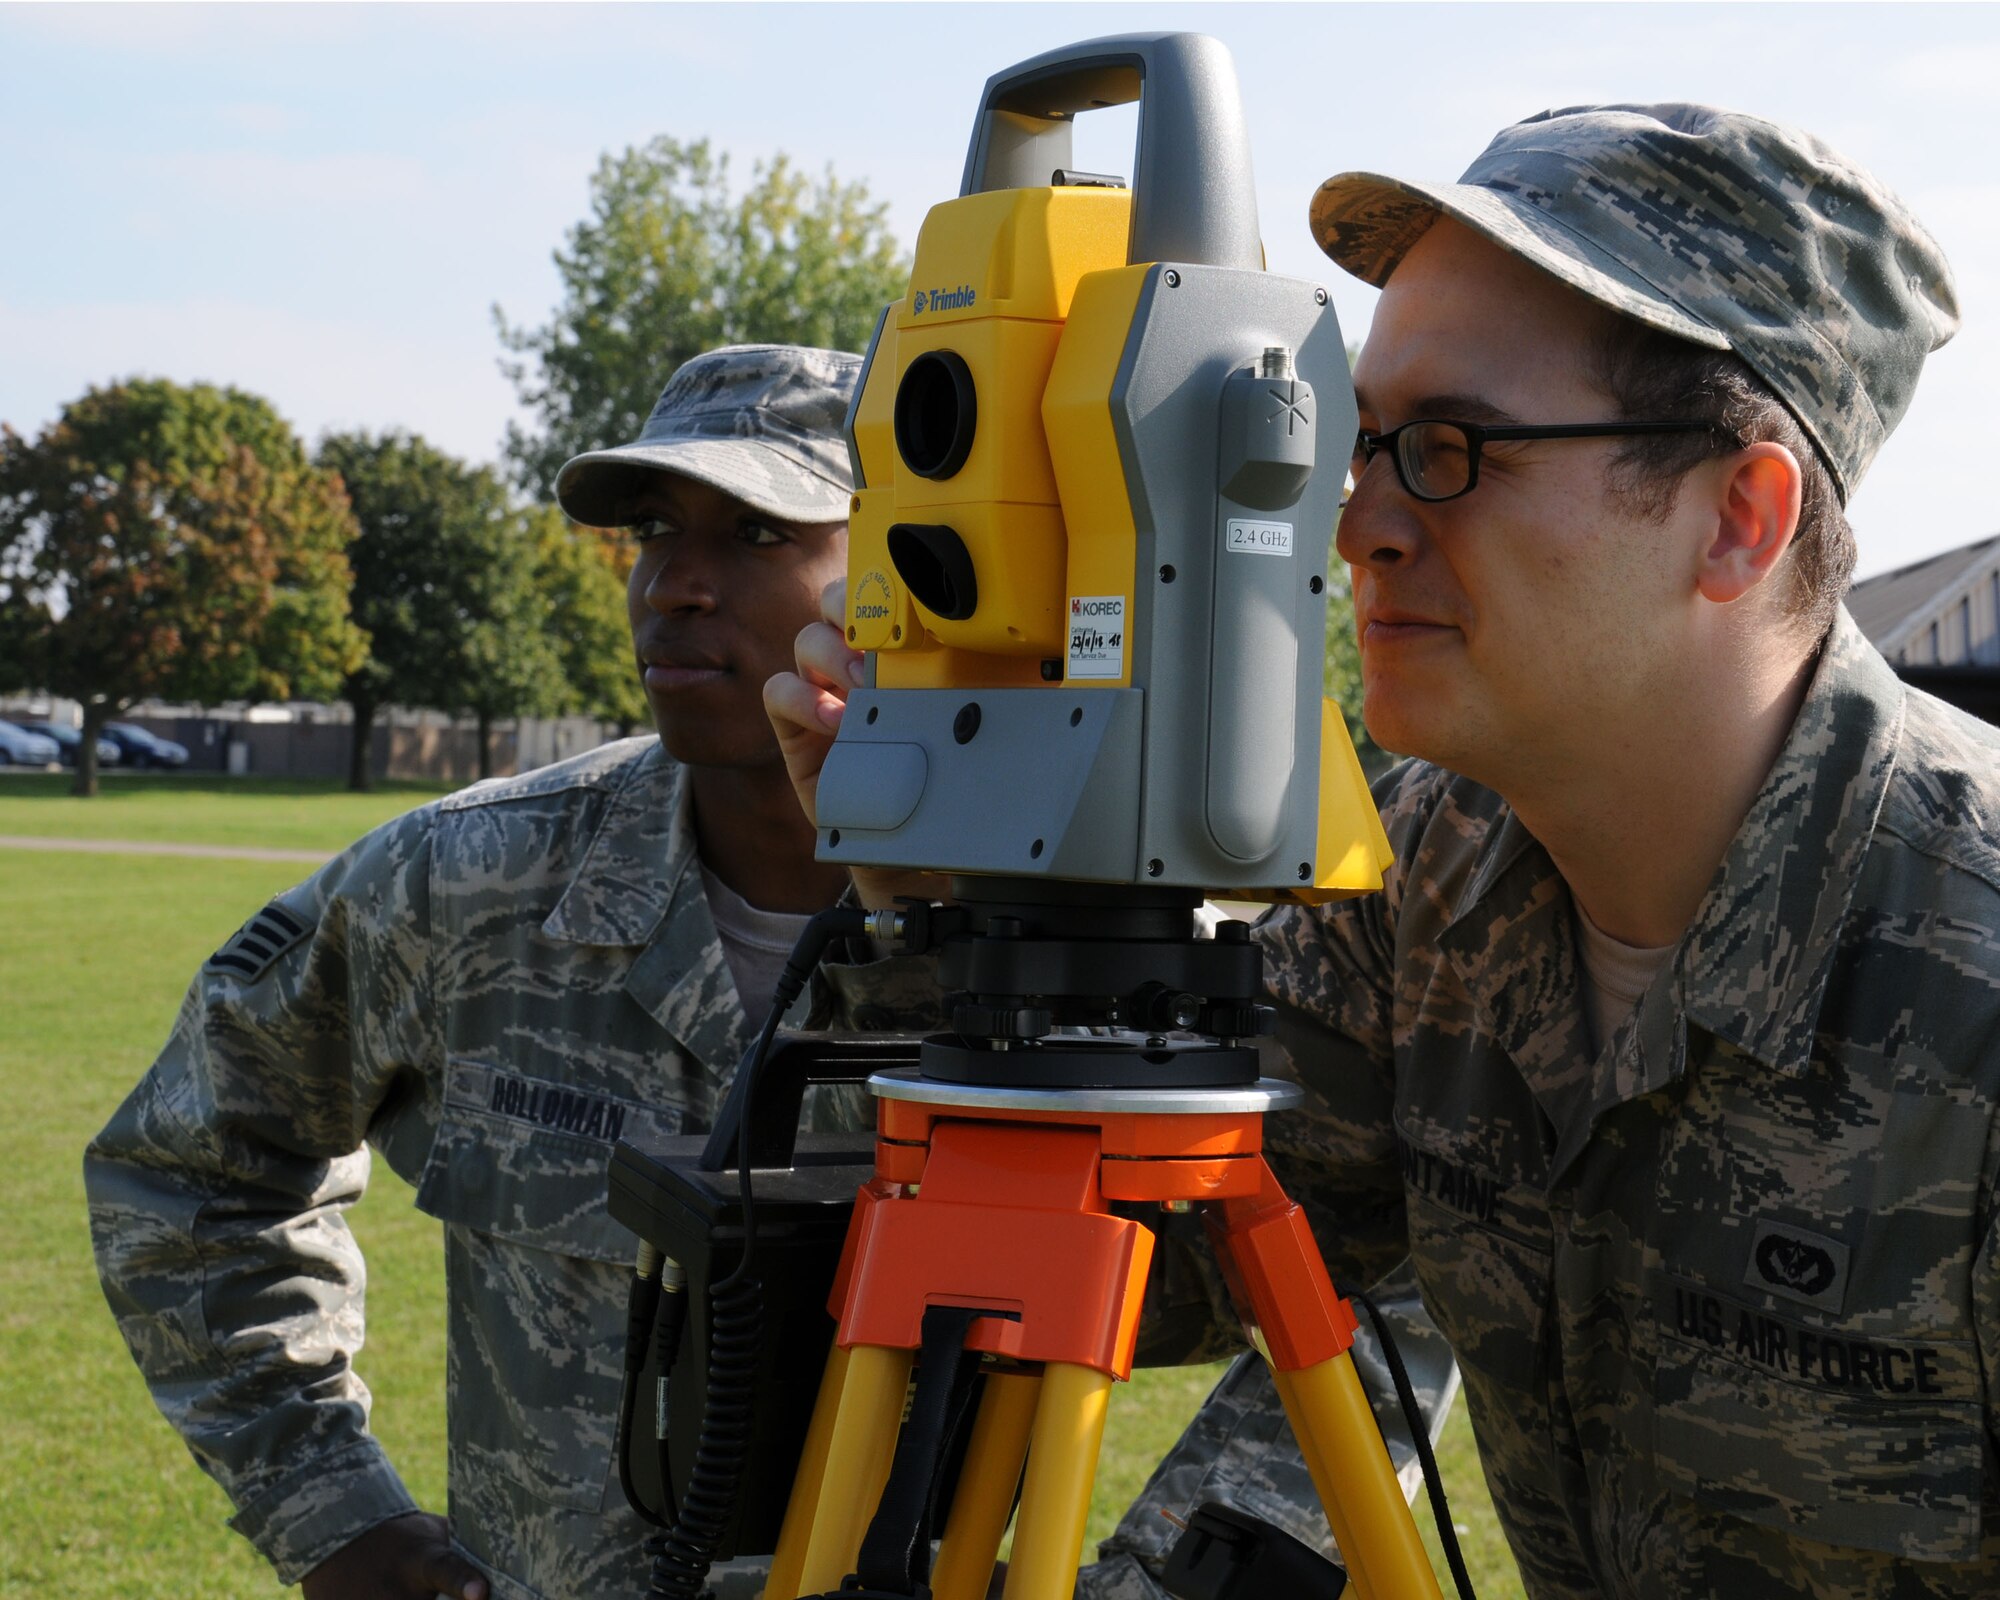 U.S. Air Force Staff Sgt. Erik Holloman, left, 100th Civil Engineer Squadron NCO in charge of geobase from Washington, D.C., trains U.S. Air Force Senior Airman Logan Fountaine, 100th CES engineering journeyman from Ontario, N.Y., on how to use a geodimeter Sept. 27, 2013, on RAF Mildenhall, England. The 100th CES Engineer Assistants shop provides mapping, drafting and surveying support to maintain the installation base map. This support includes drawing and updating individual building floor plans, and ensuring all utilities and infrastructures are geo-referentially located to the exact coordinate system. (U.S. Air Force photo by Gina Randall/Released)